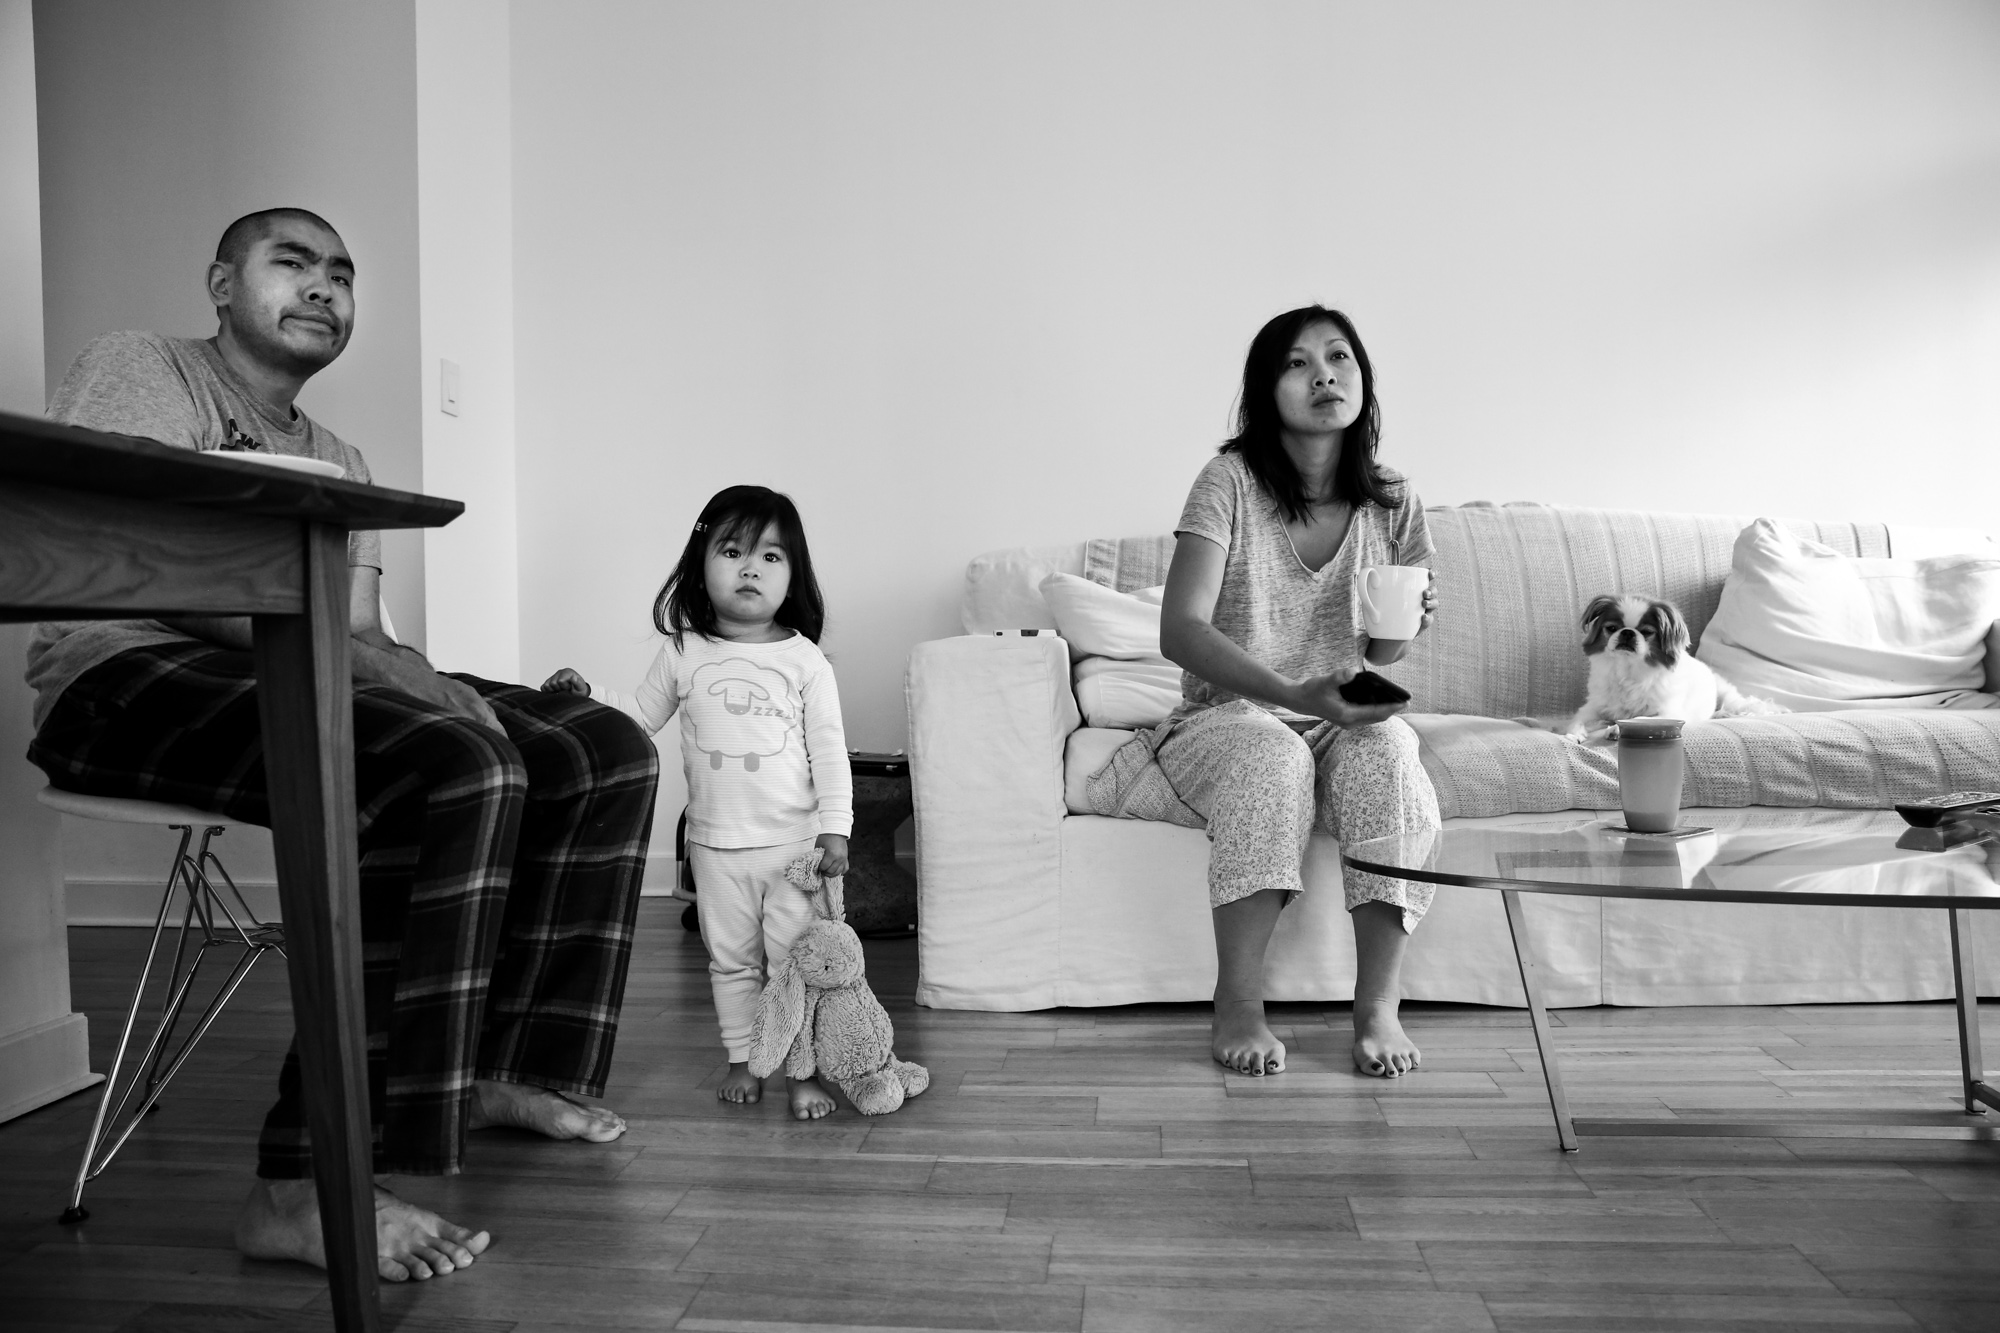 Man sits at table while child stands with stuffed bunny and woman sits on couch with dog